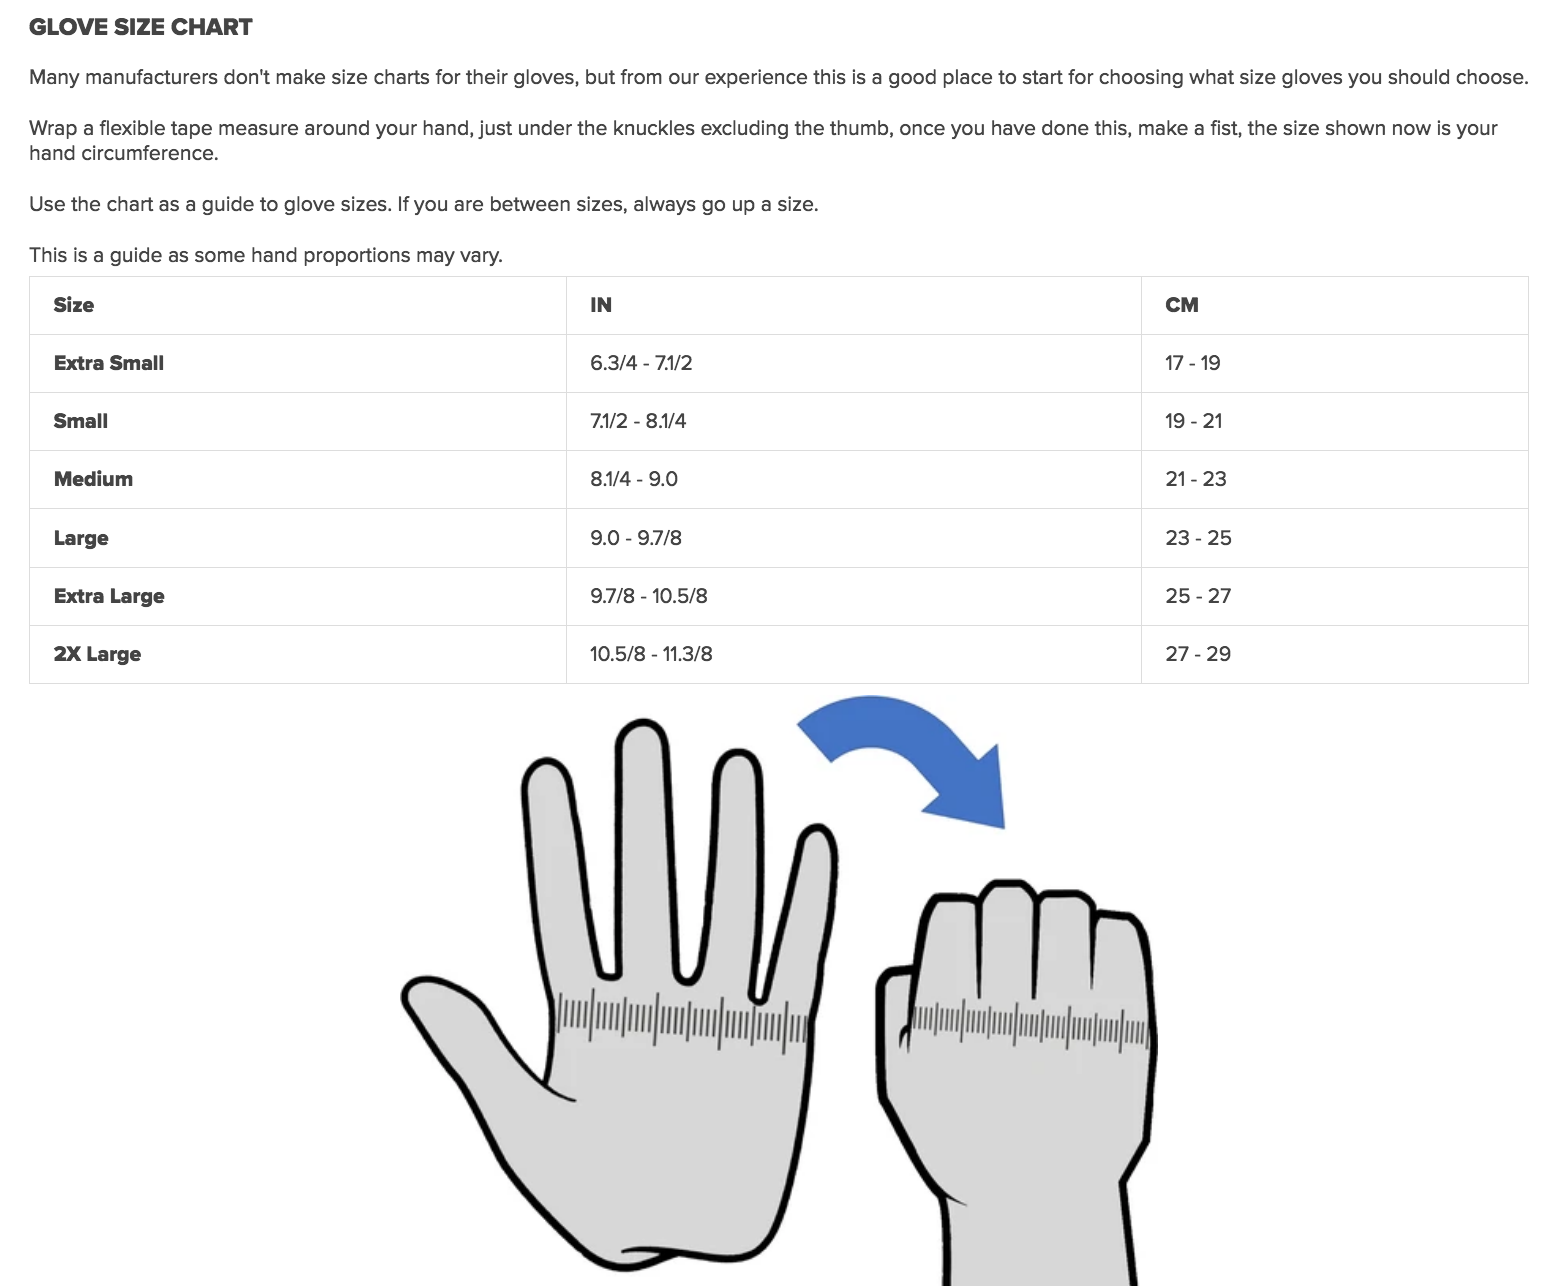 Male Size Chart for V-Skin Glove - Discontinued